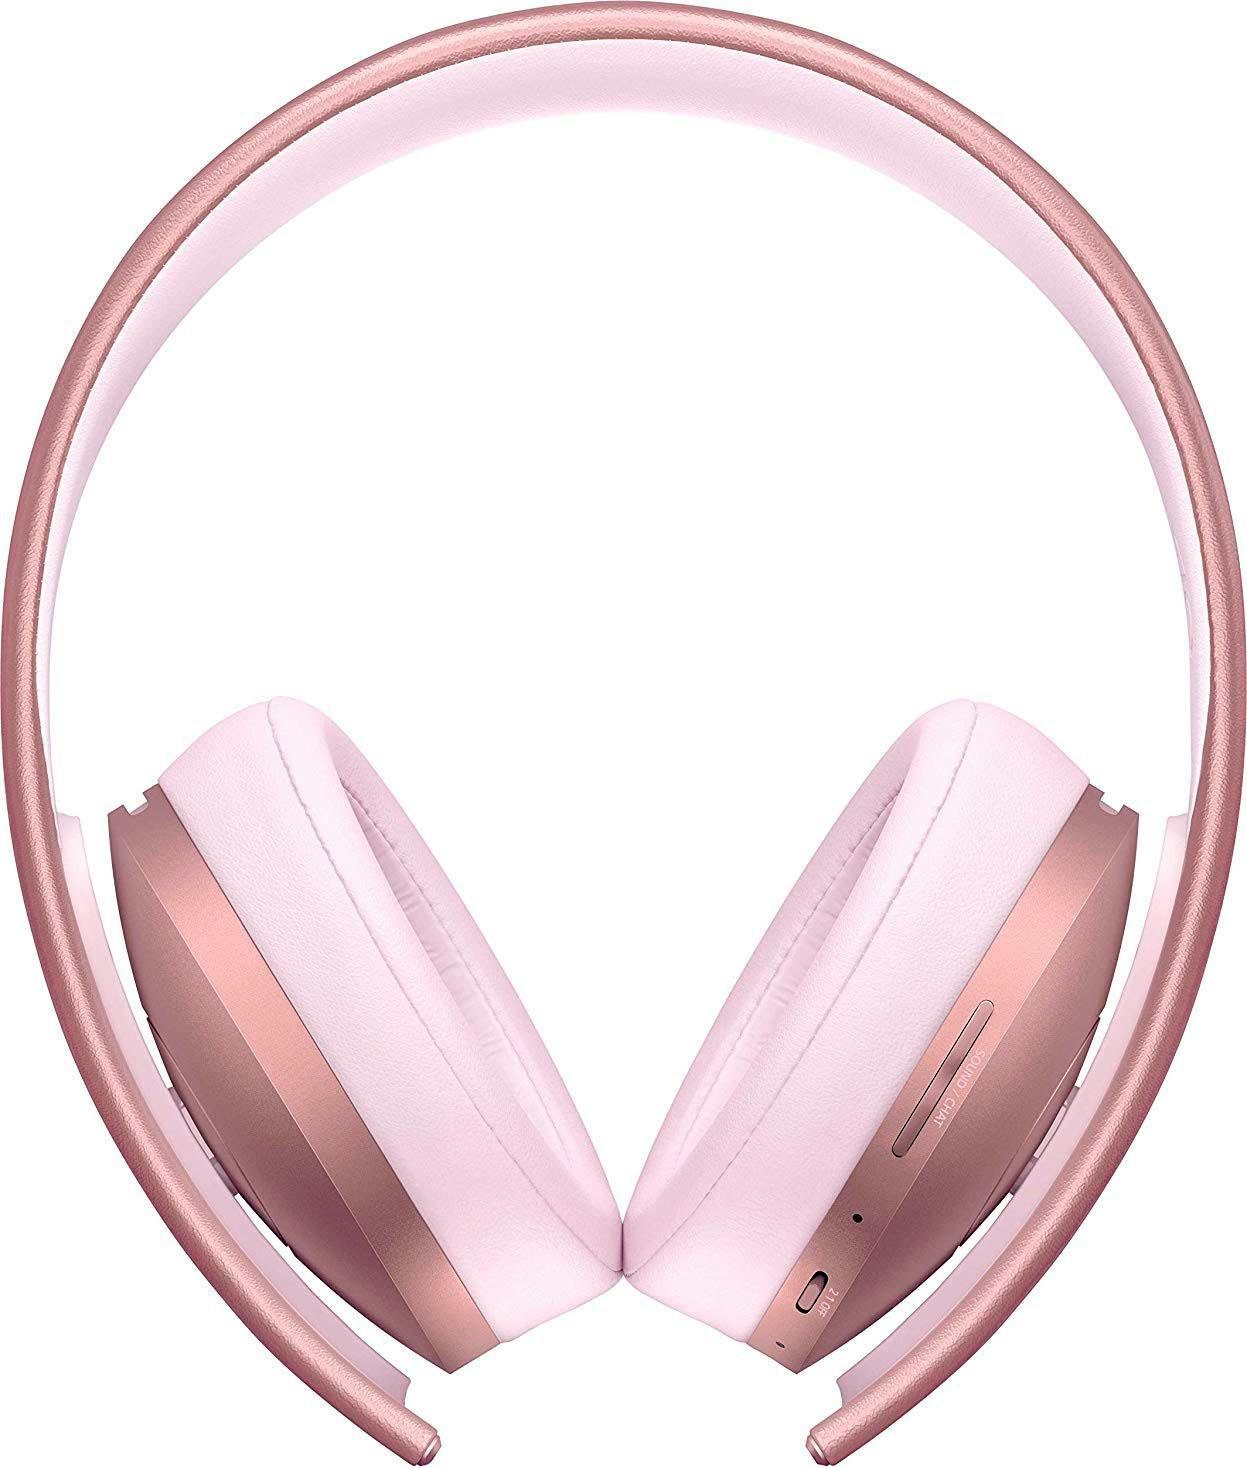 PlayStation 4 »Headset Rose Gold Edition« Headset | OTTO